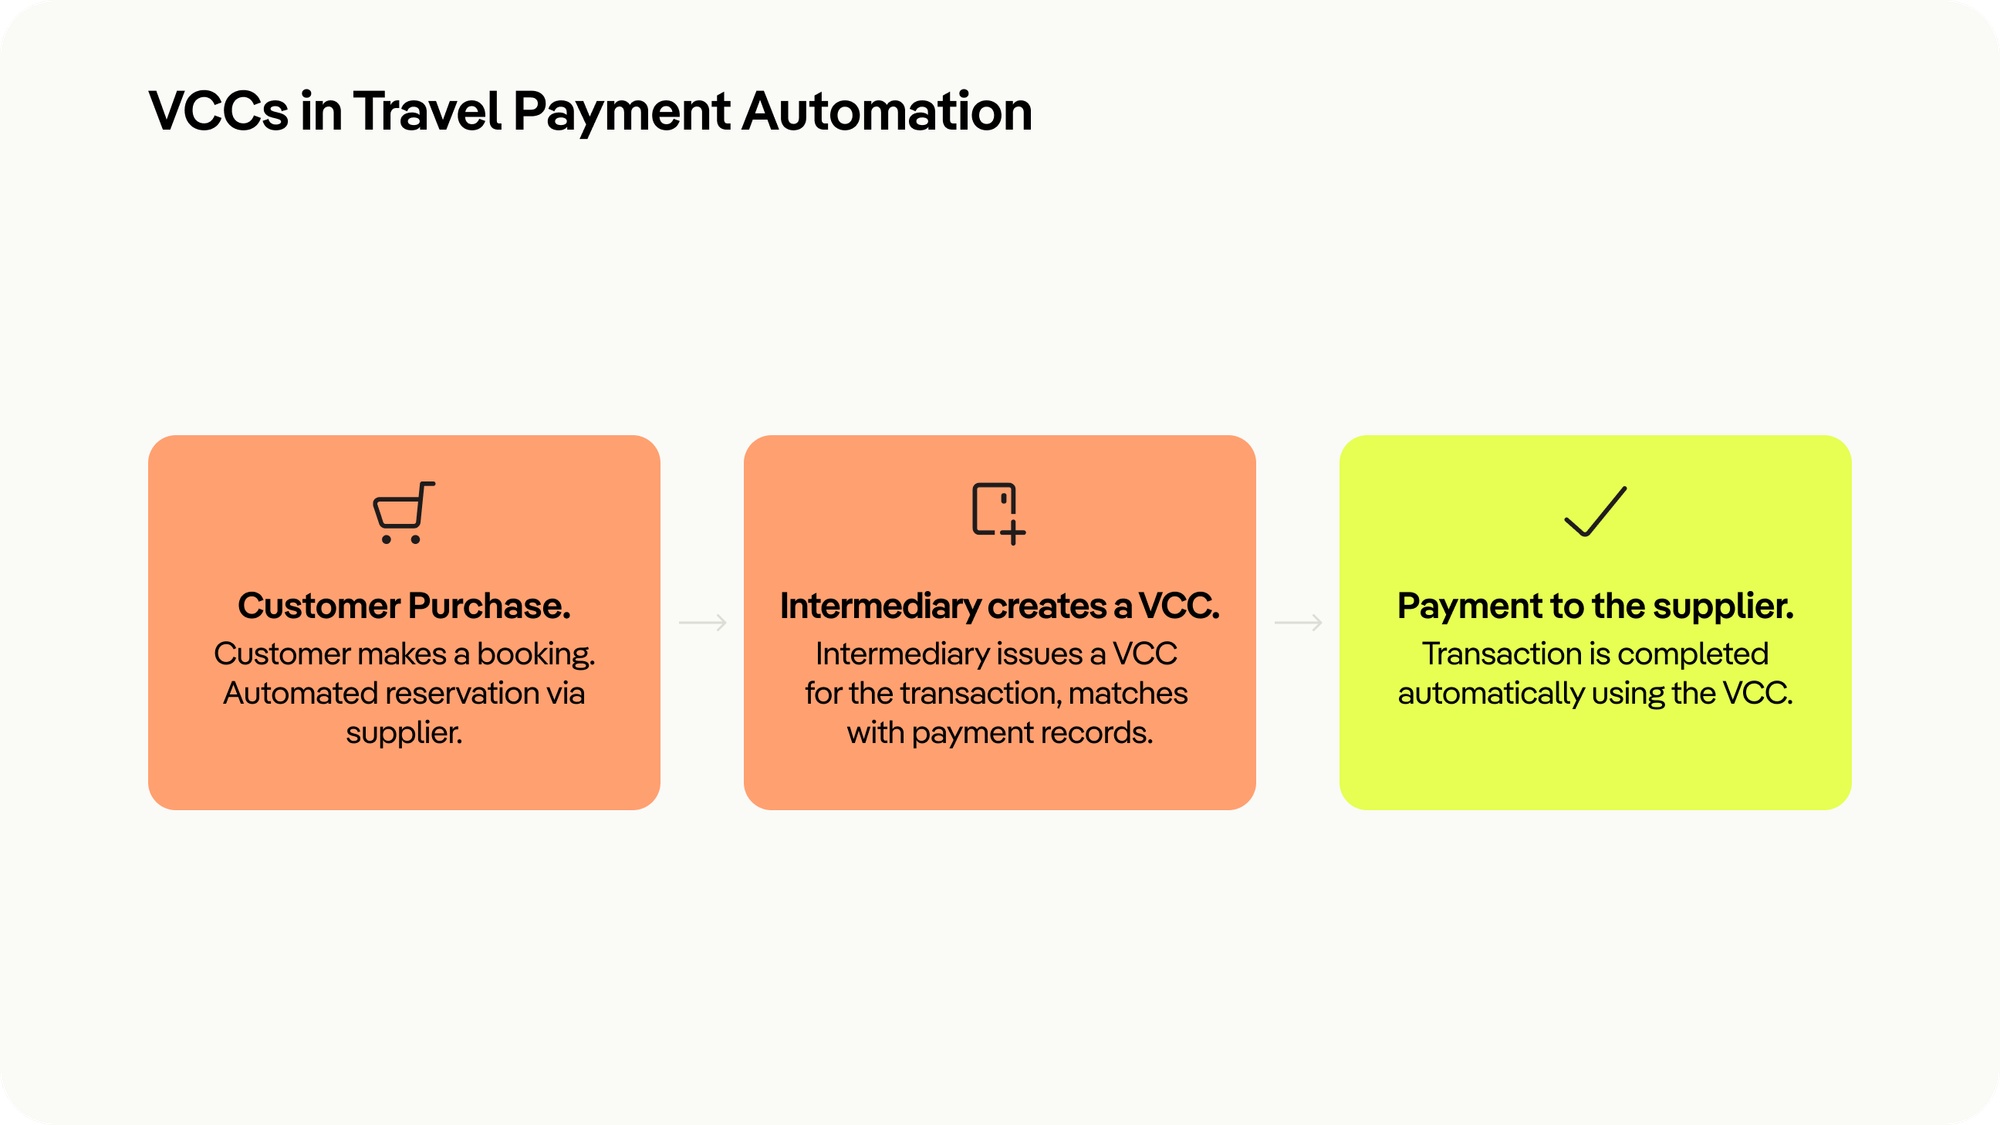 Virtual Credit Cards and Payment Automation